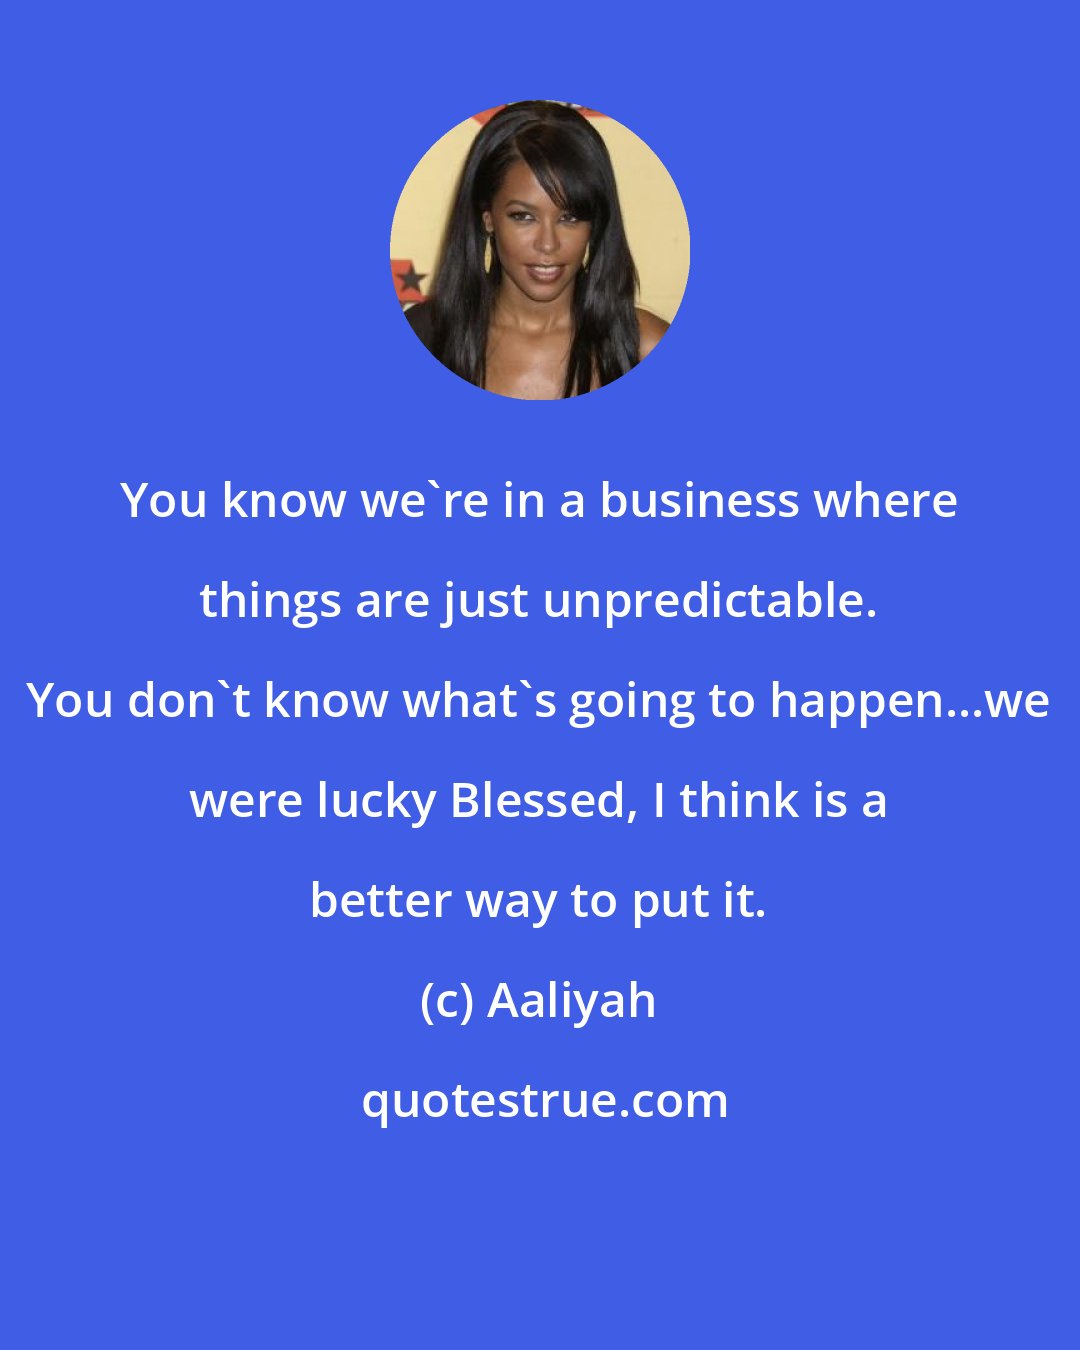 Aaliyah: You know we're in a business where things are just unpredictable. You don't know what's going to happen...we were lucky Blessed, I think is a better way to put it.